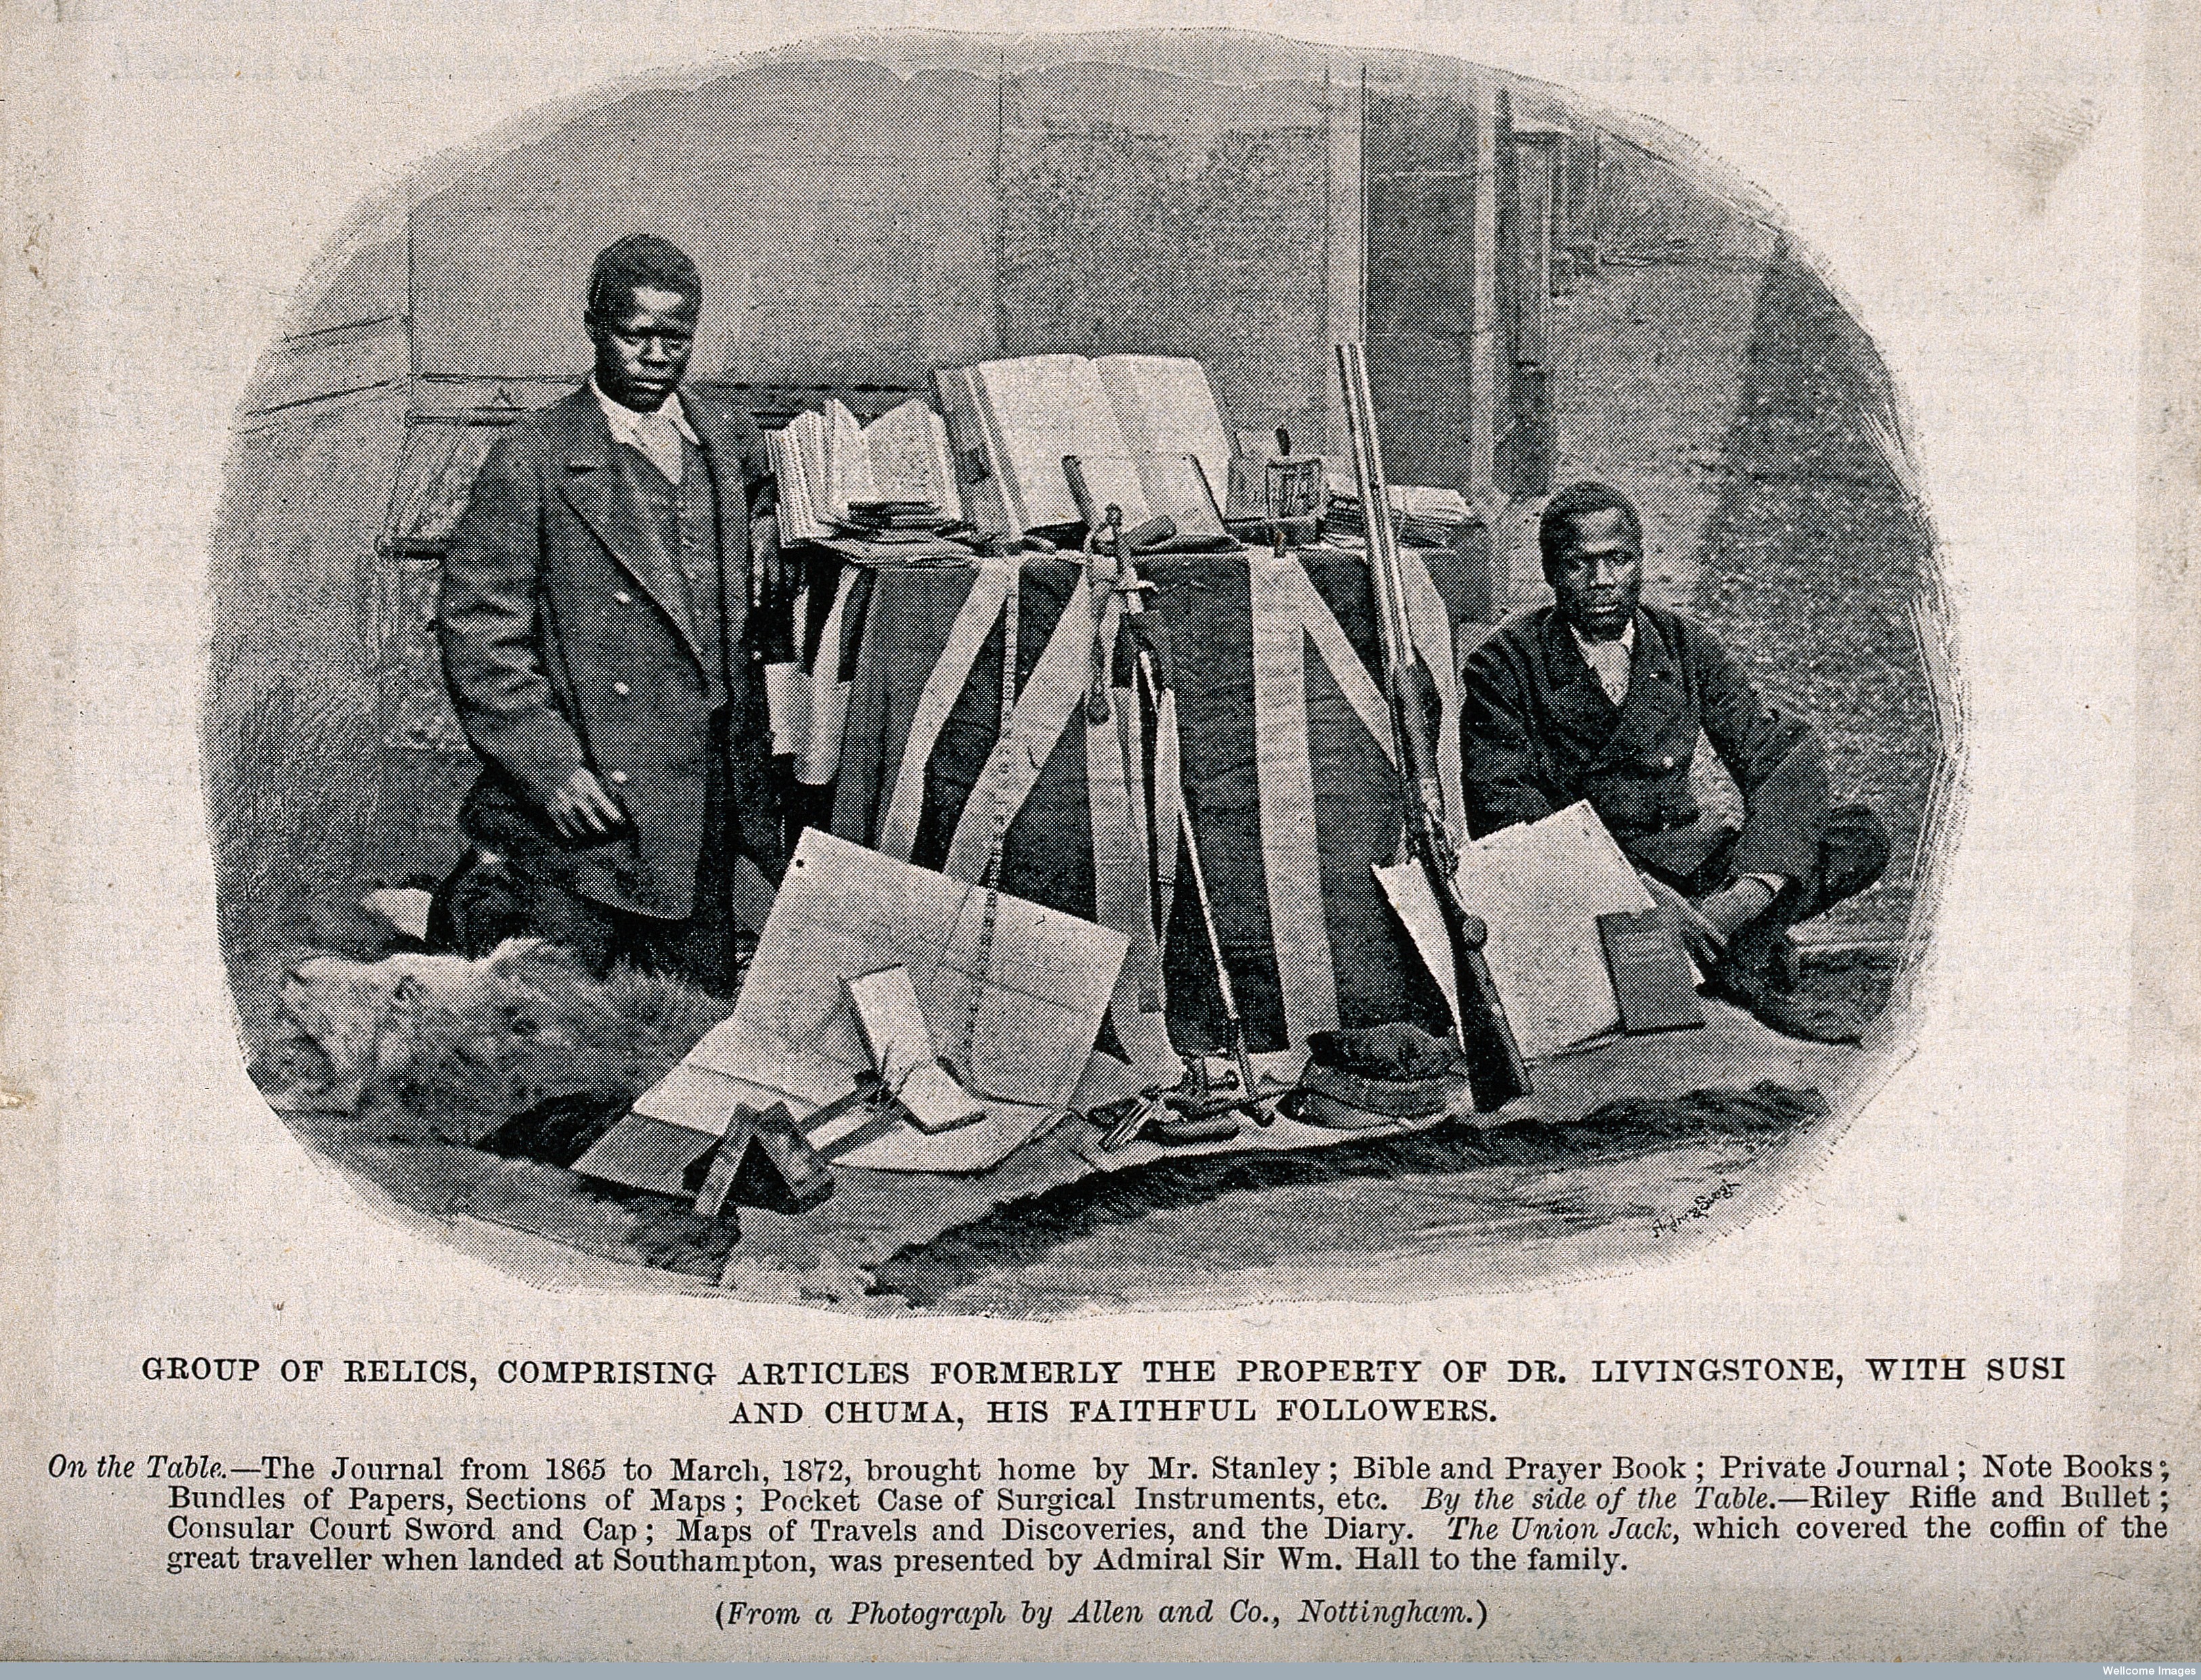 'Group of Relics, Comprising Articles Formerly the Property of Dr. Livingstone, with Susi and Chuma, His Faithful Followers.' Copyright Wellcome Library, London. Creative Commons Attribution 4.0 International (https://creativecommons.org/licenses/by/4.0/).